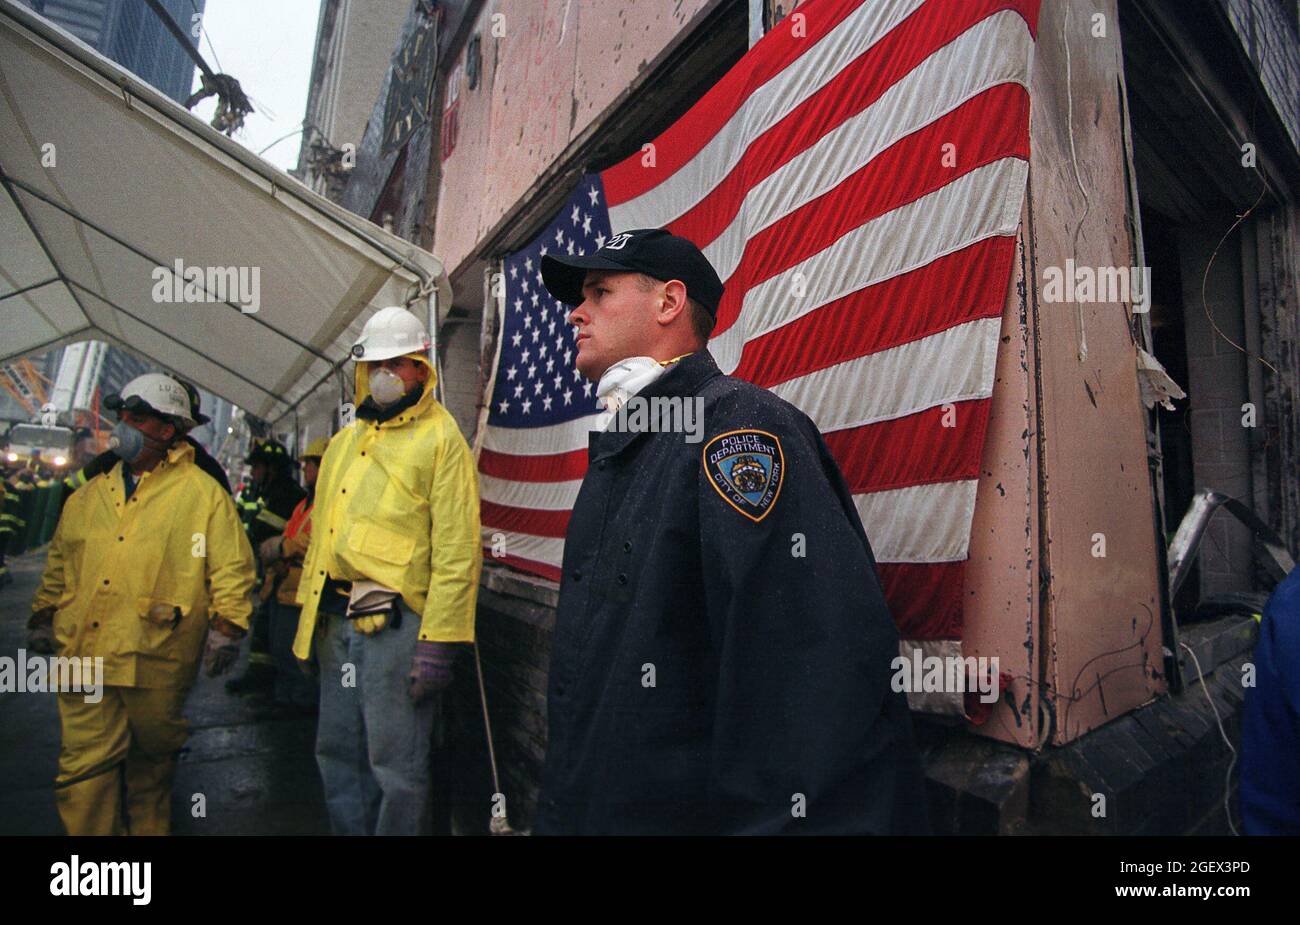 Photos taken at various locations around Ground Zero, formerly the World Trade Center, New York City, N.Y., Sept. 14, 2001. Stock Photo